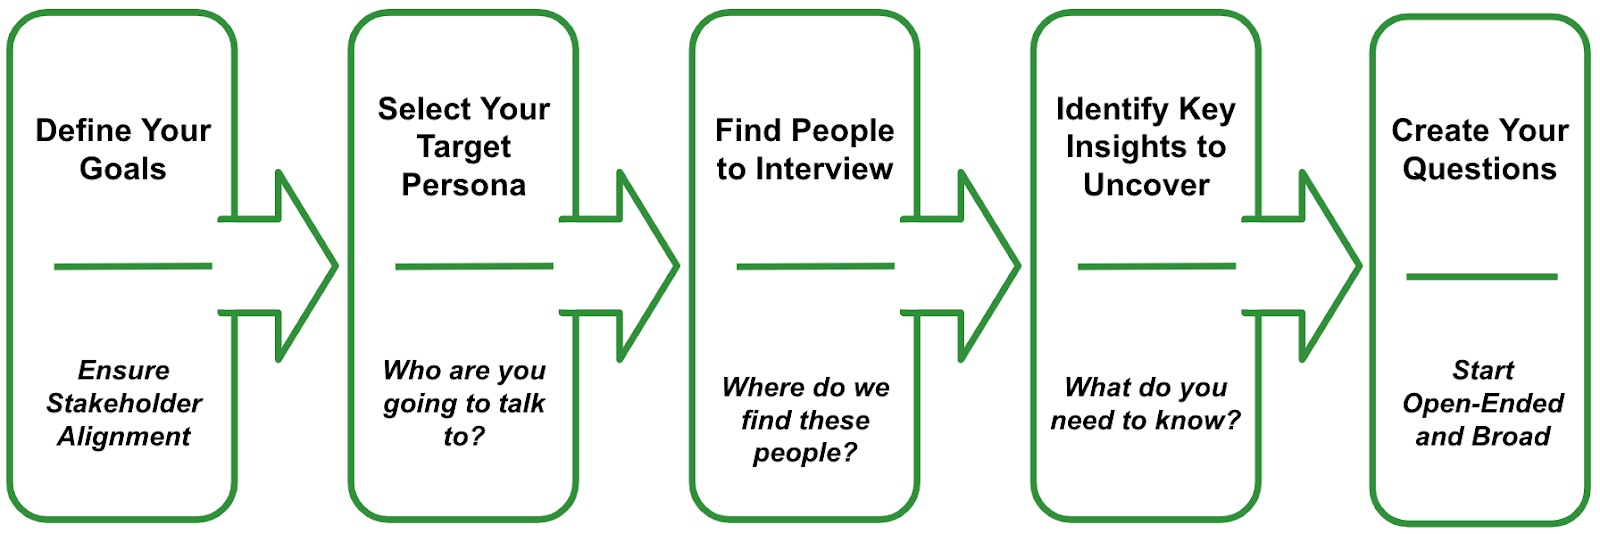 Persona interview framework: 1. Define your goals. 2. Select your target persona. 3. Find people to interview. 4. Identify key insights to uncover. 5. Create your persona questions.